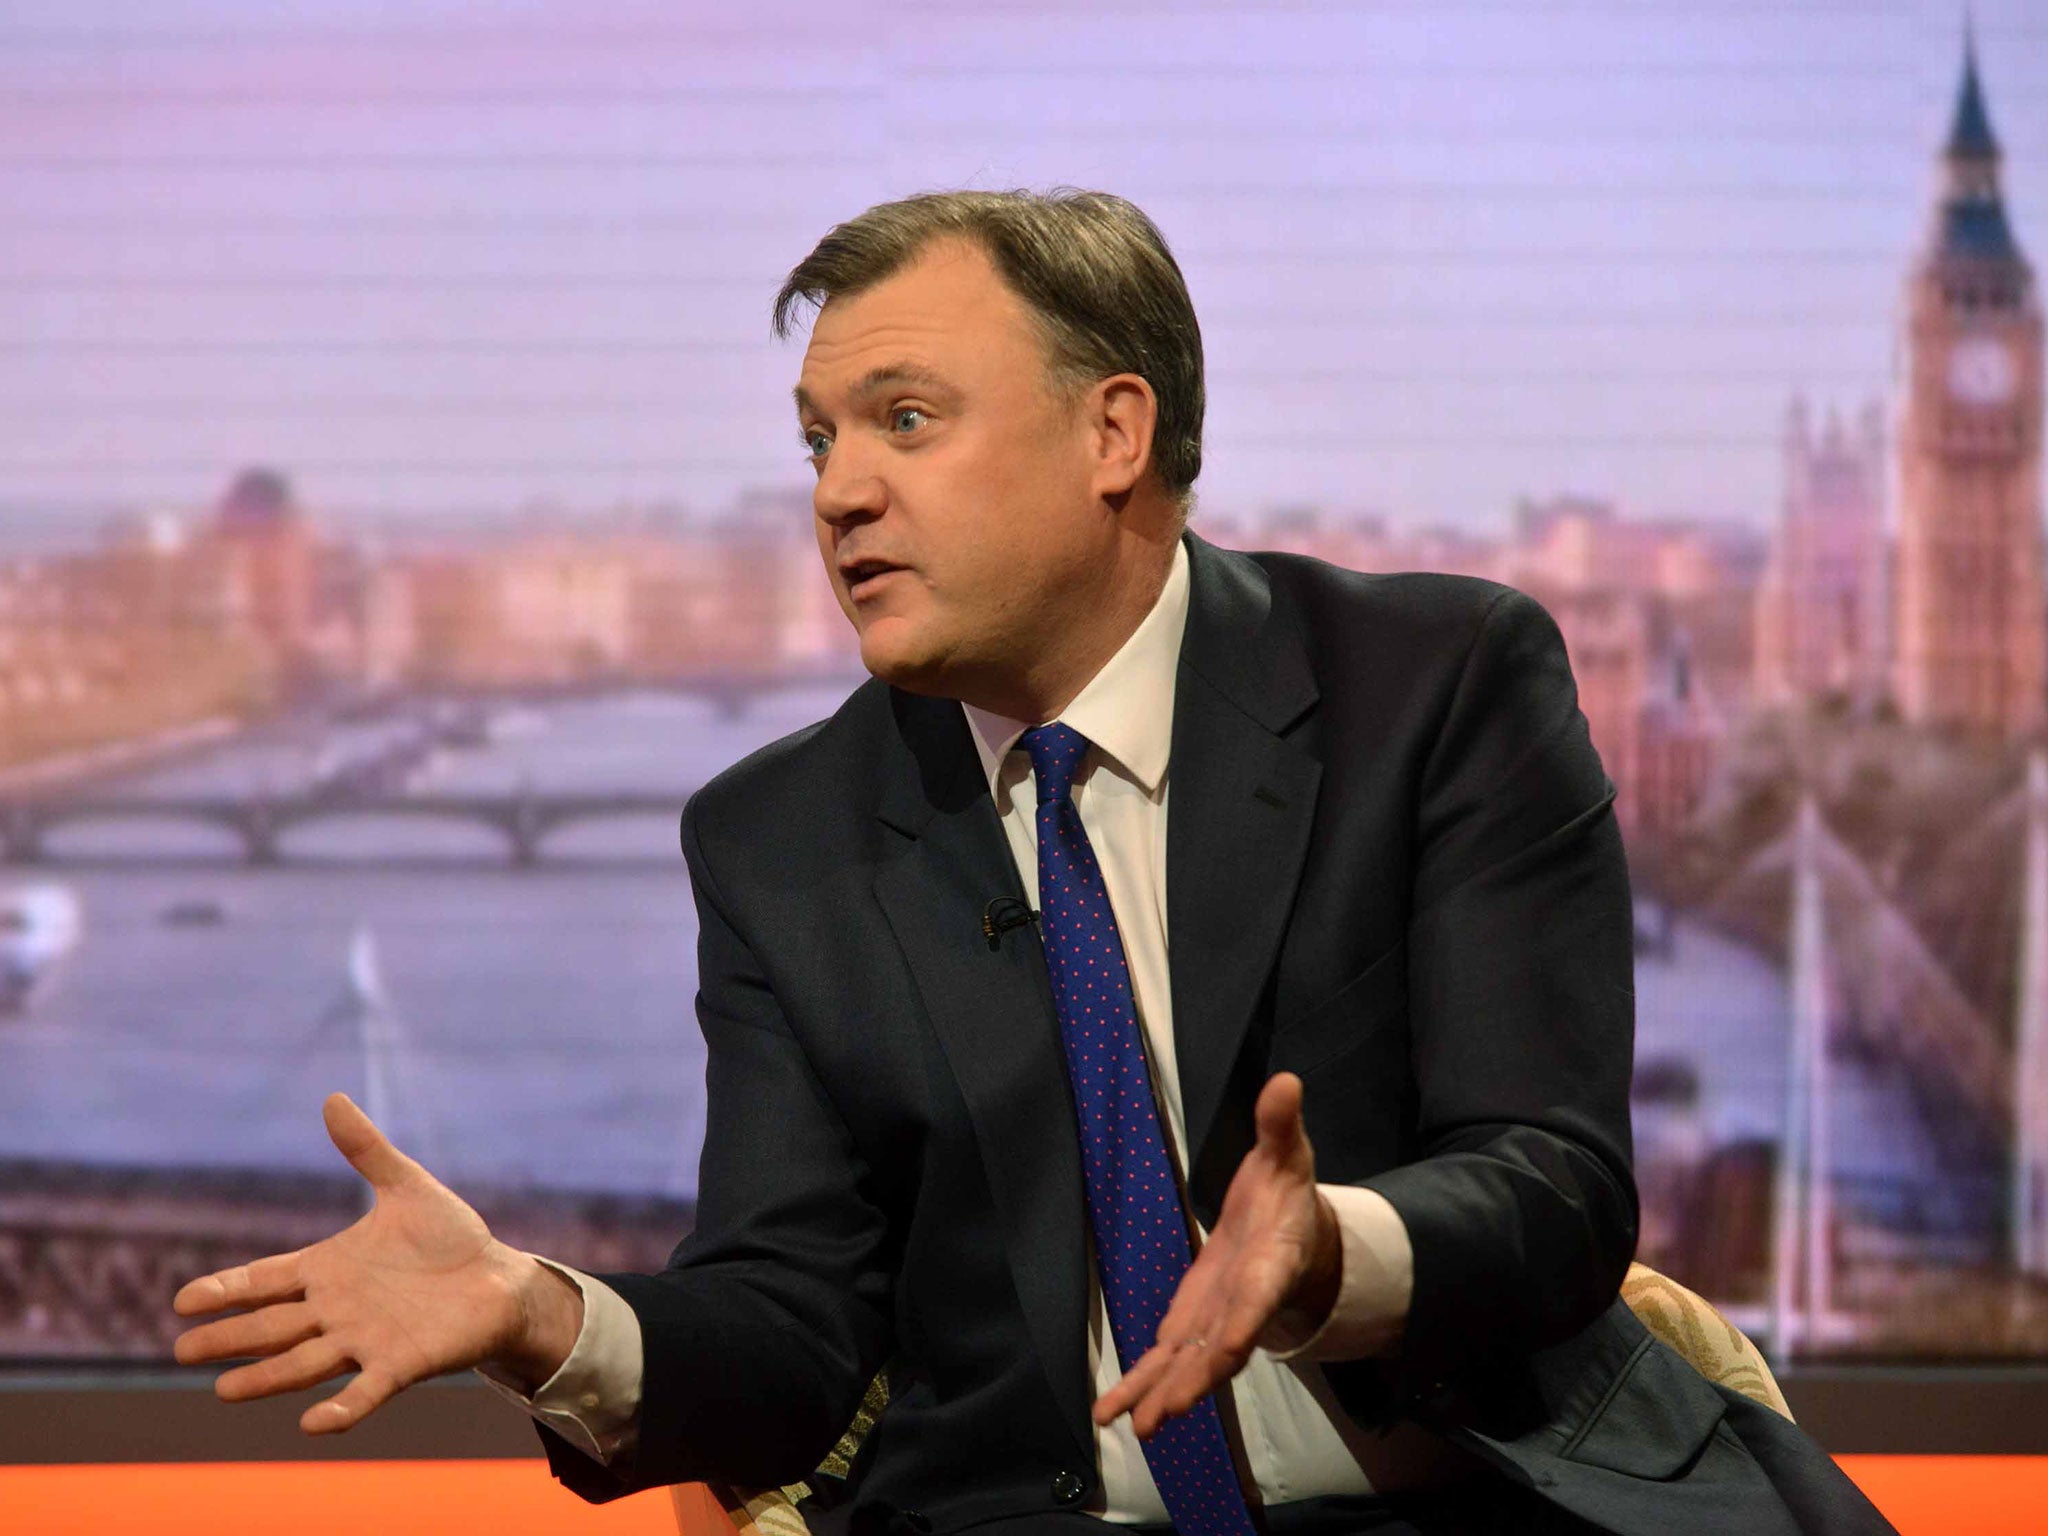 Ed Balls, the shadow Chancellor, will launch Labour’s strongest attack on the Tories’ plans in a speech in London as he launches a campaign to spell out the impact of “more Tory austerity.”